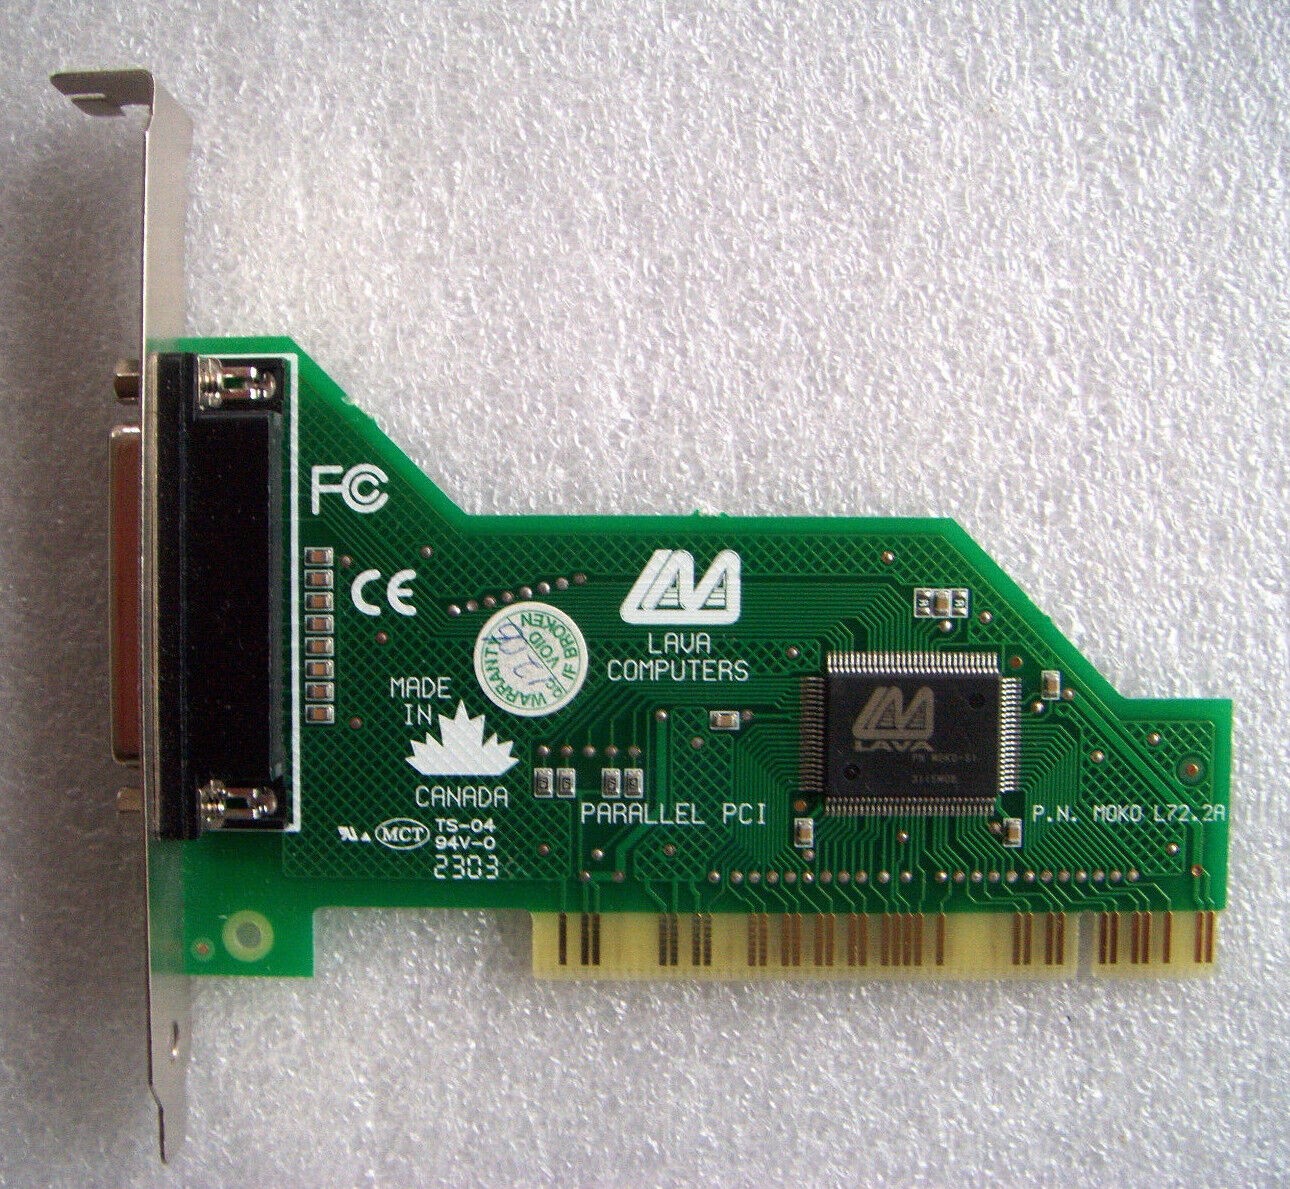 Lava Computers Single Parallel PCI Adapter Card P/N: MOKO L72.2A